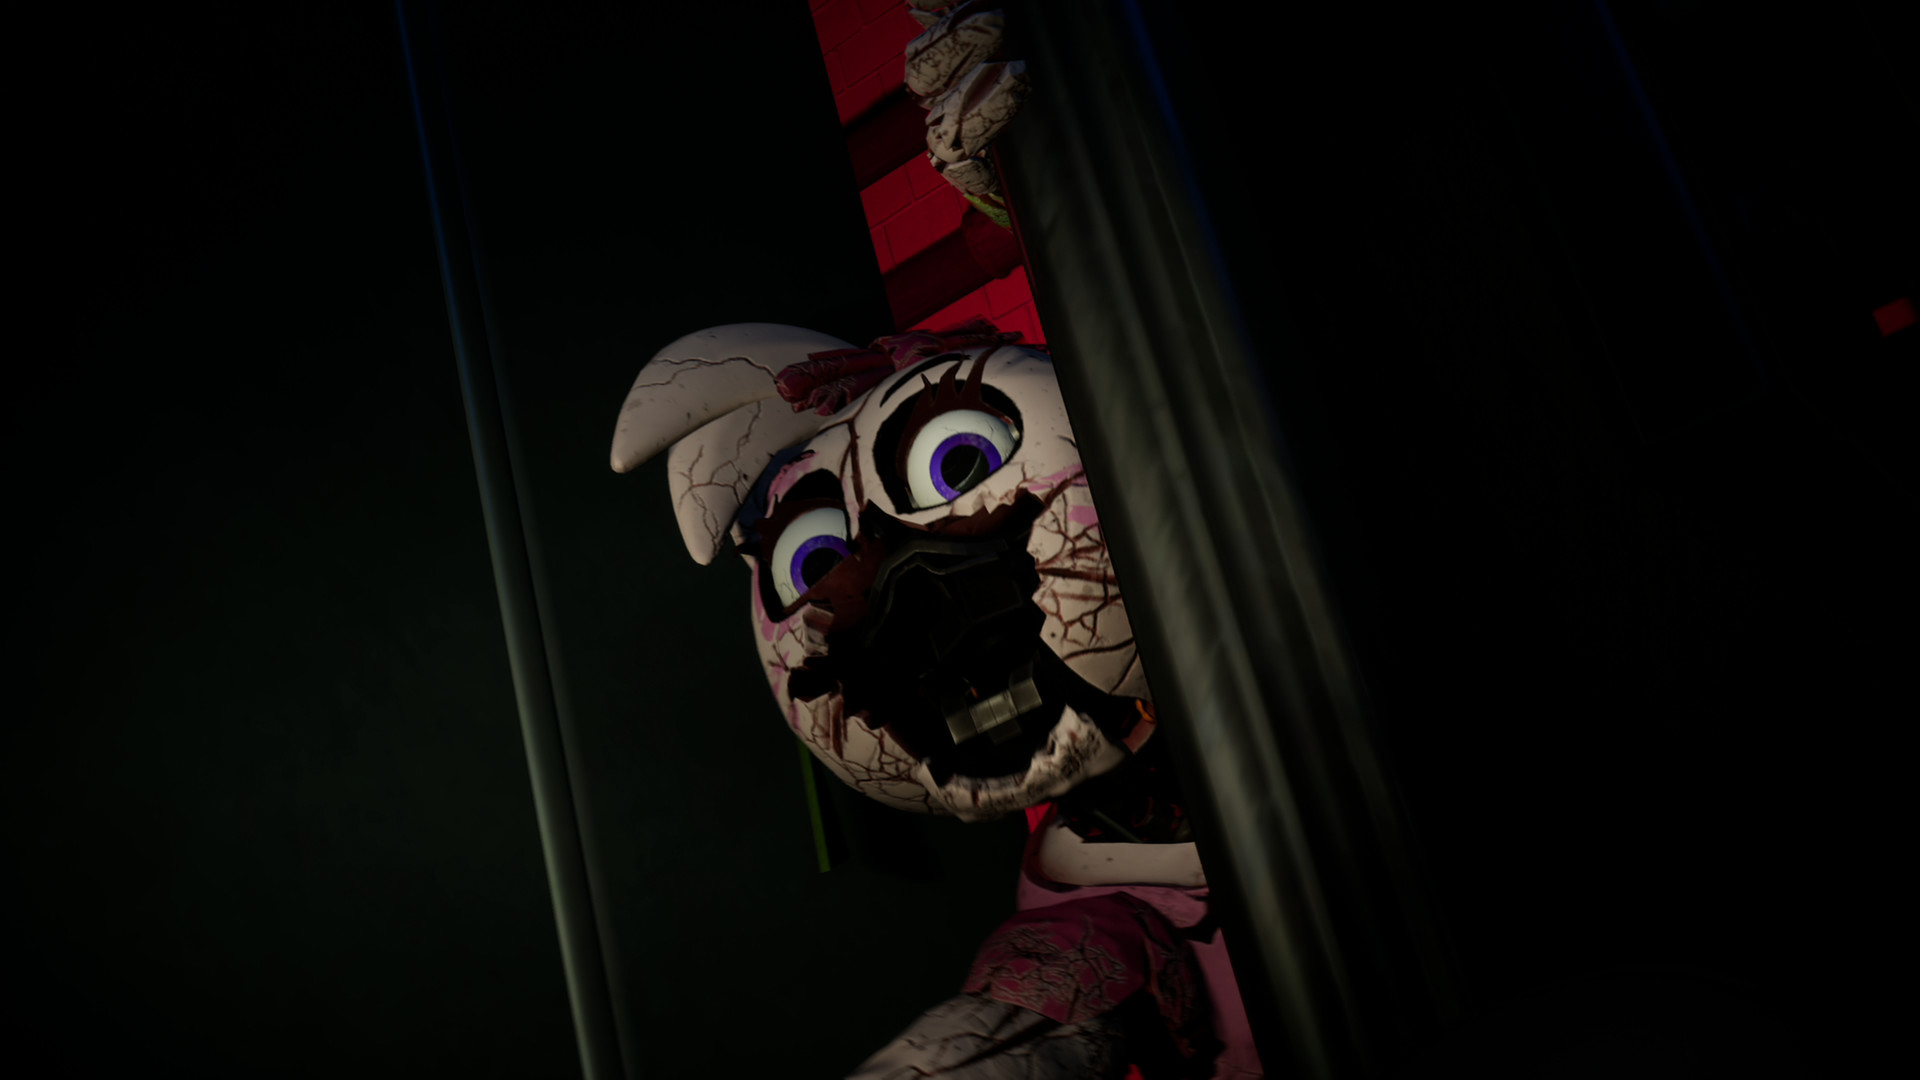 FNAF: Security Breach Ruin DLC is out now, just not for Xbox